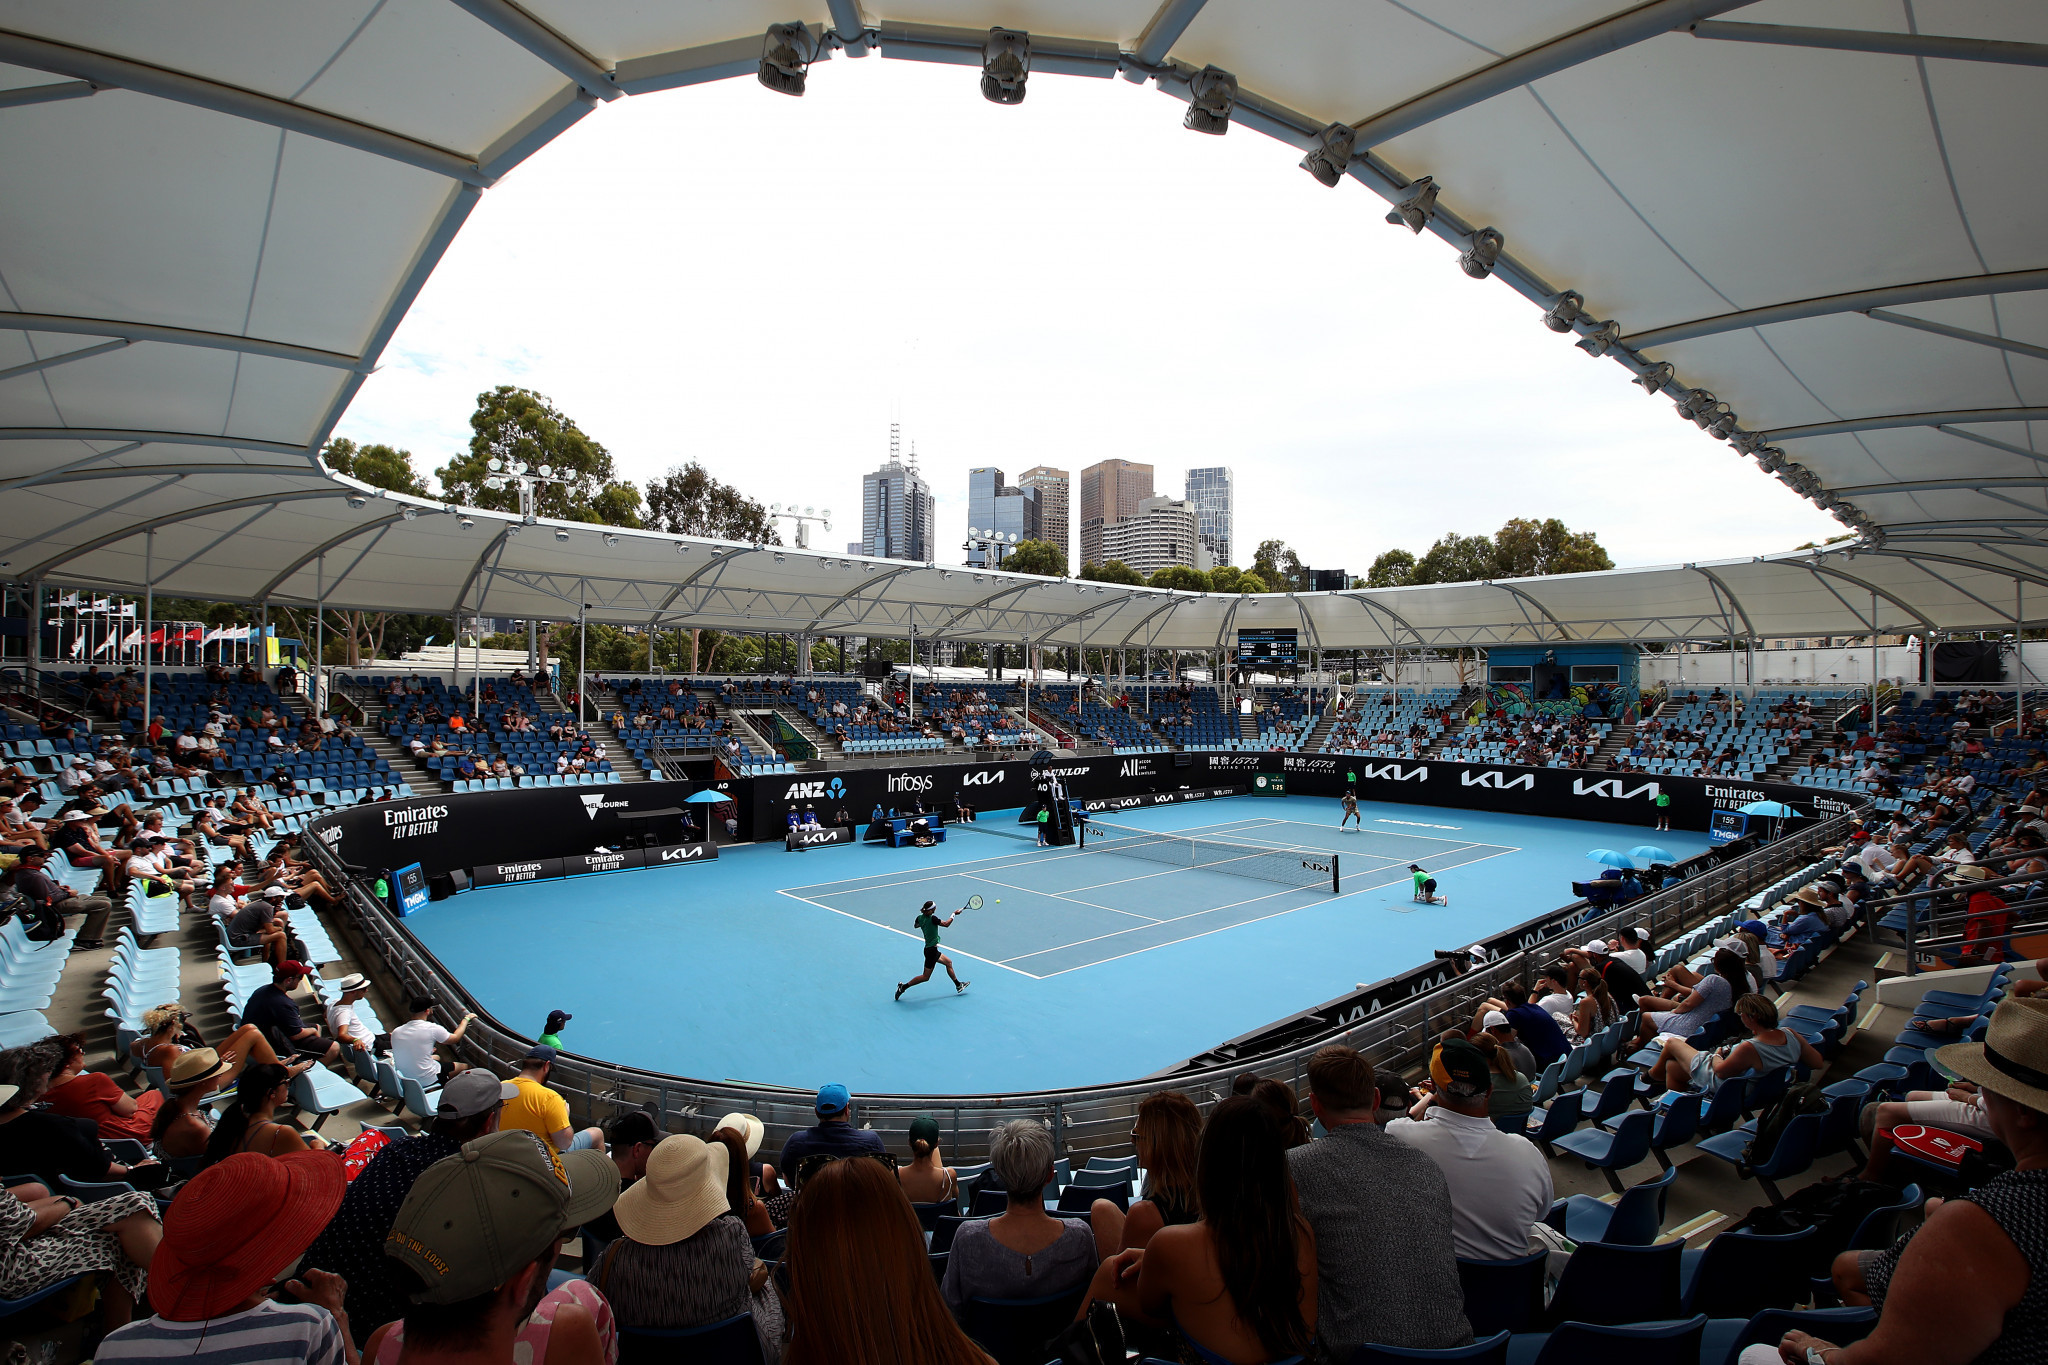 Due to the coronavirus pandemic, spectators are only able to attend in limited numbers at this year's Australian Open ©Getty Images